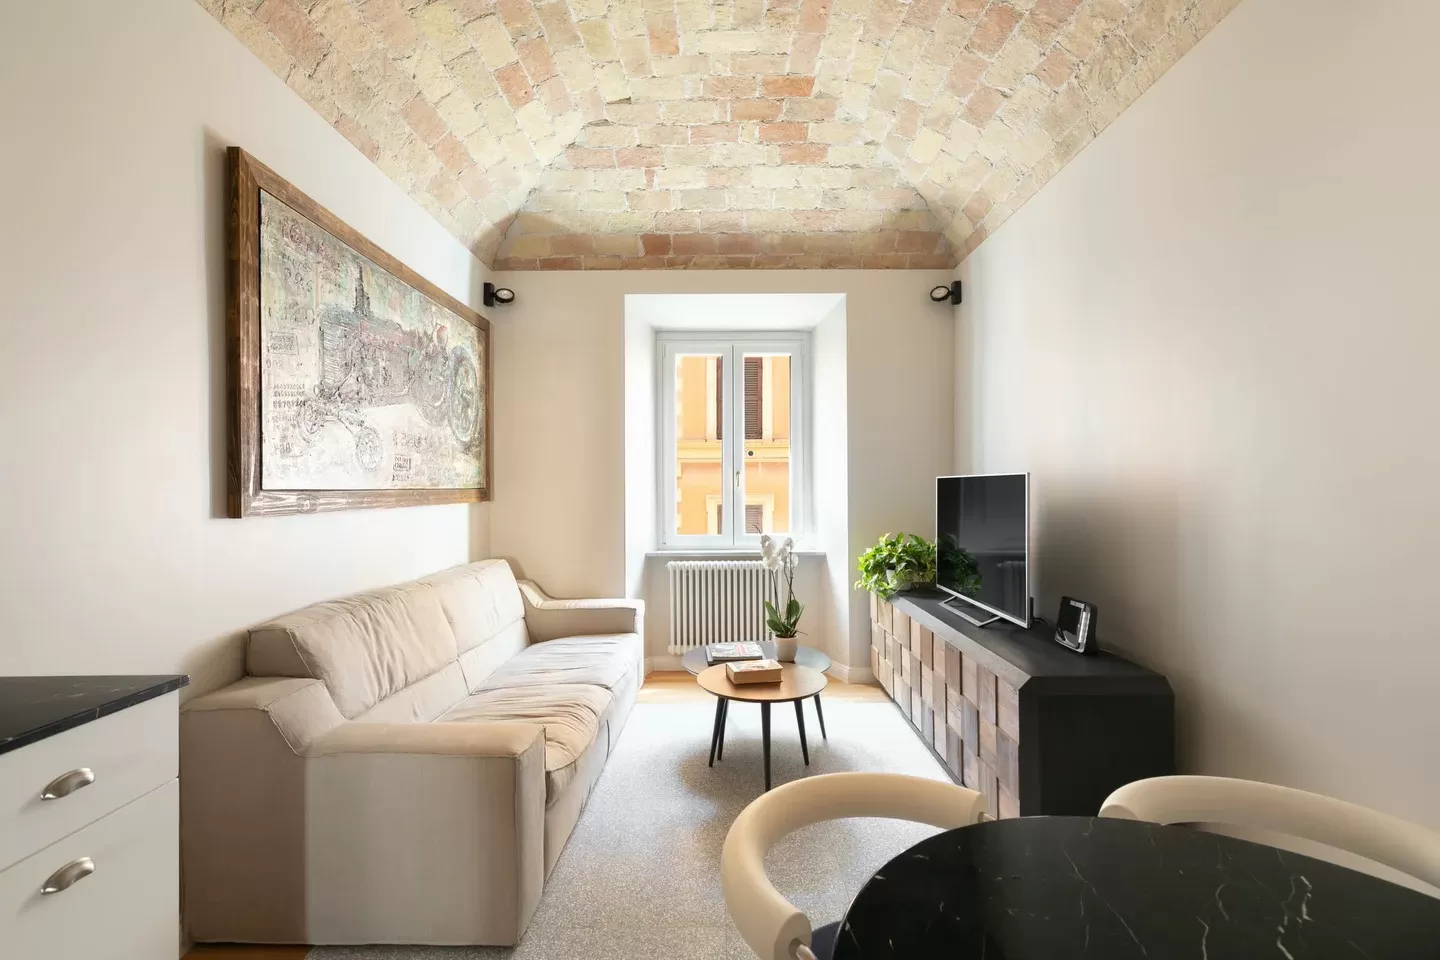 Hotels near Termini Station in Rome - Stones on the ceiling apartment - Lounge room